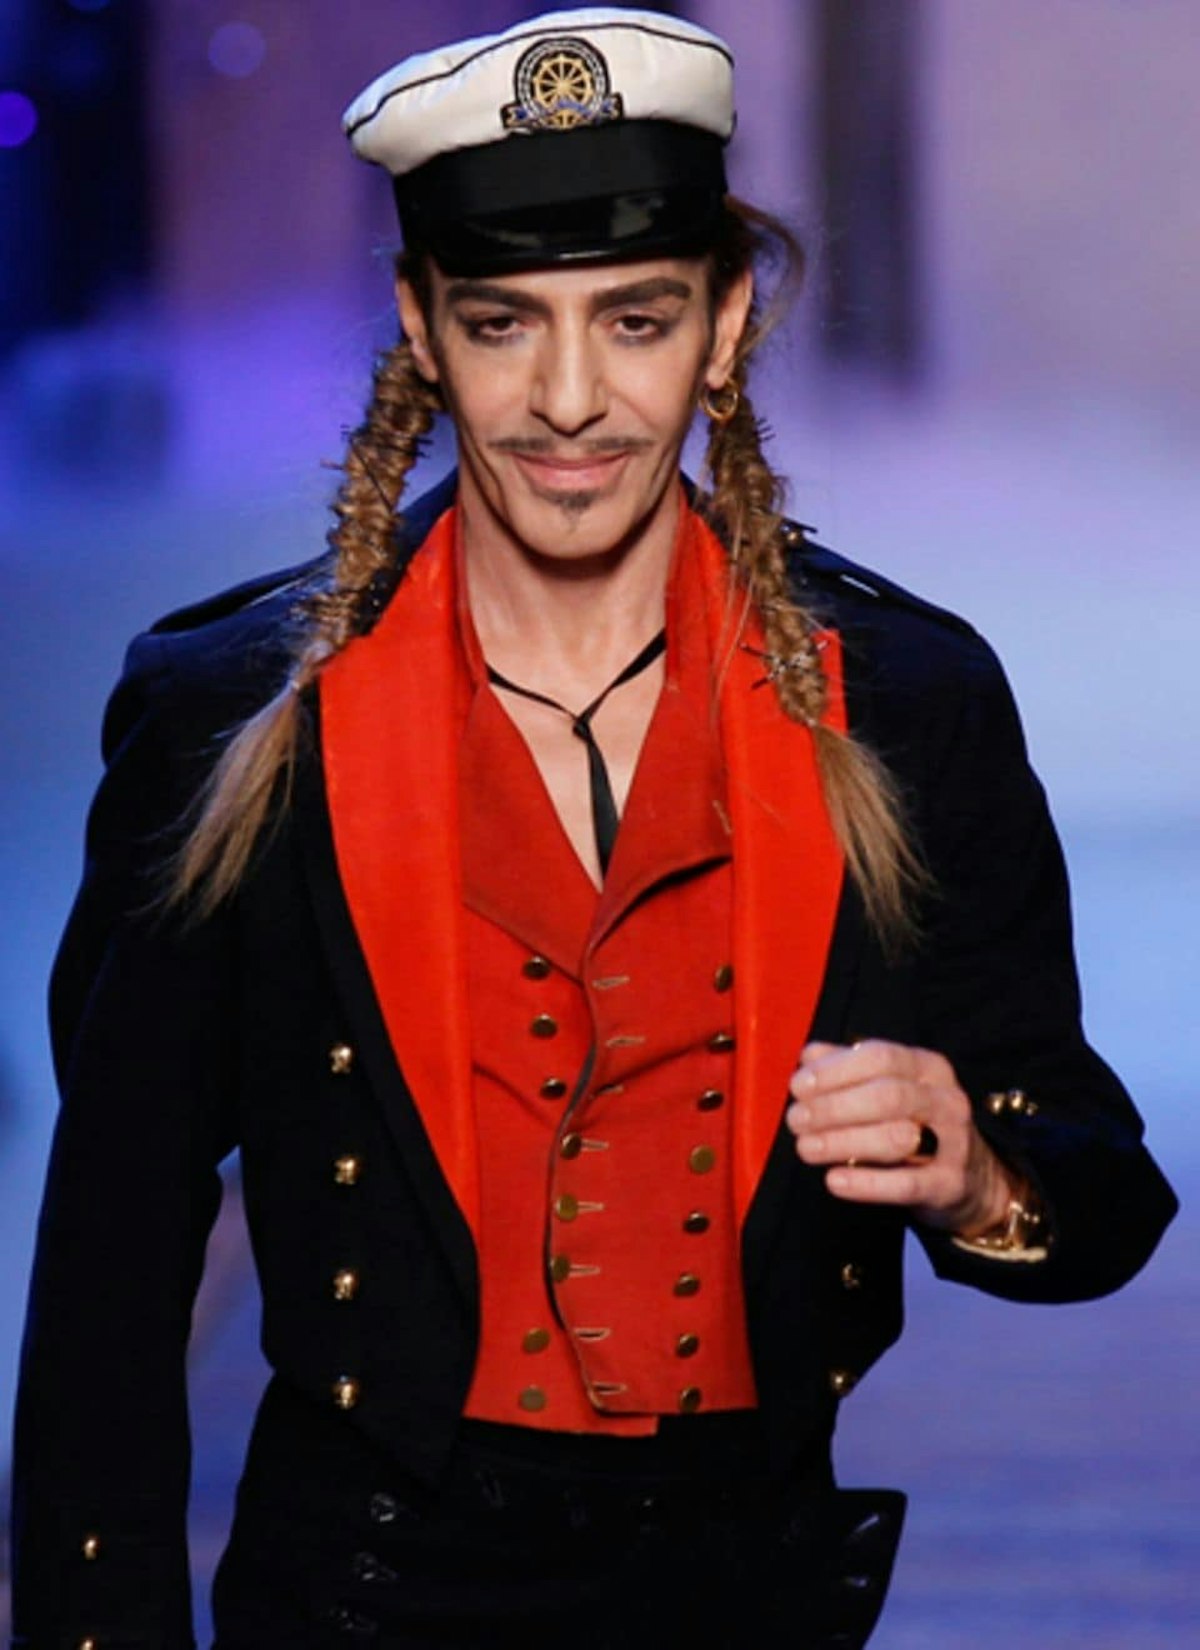 10 of the best John Galliano beauty looks of all time